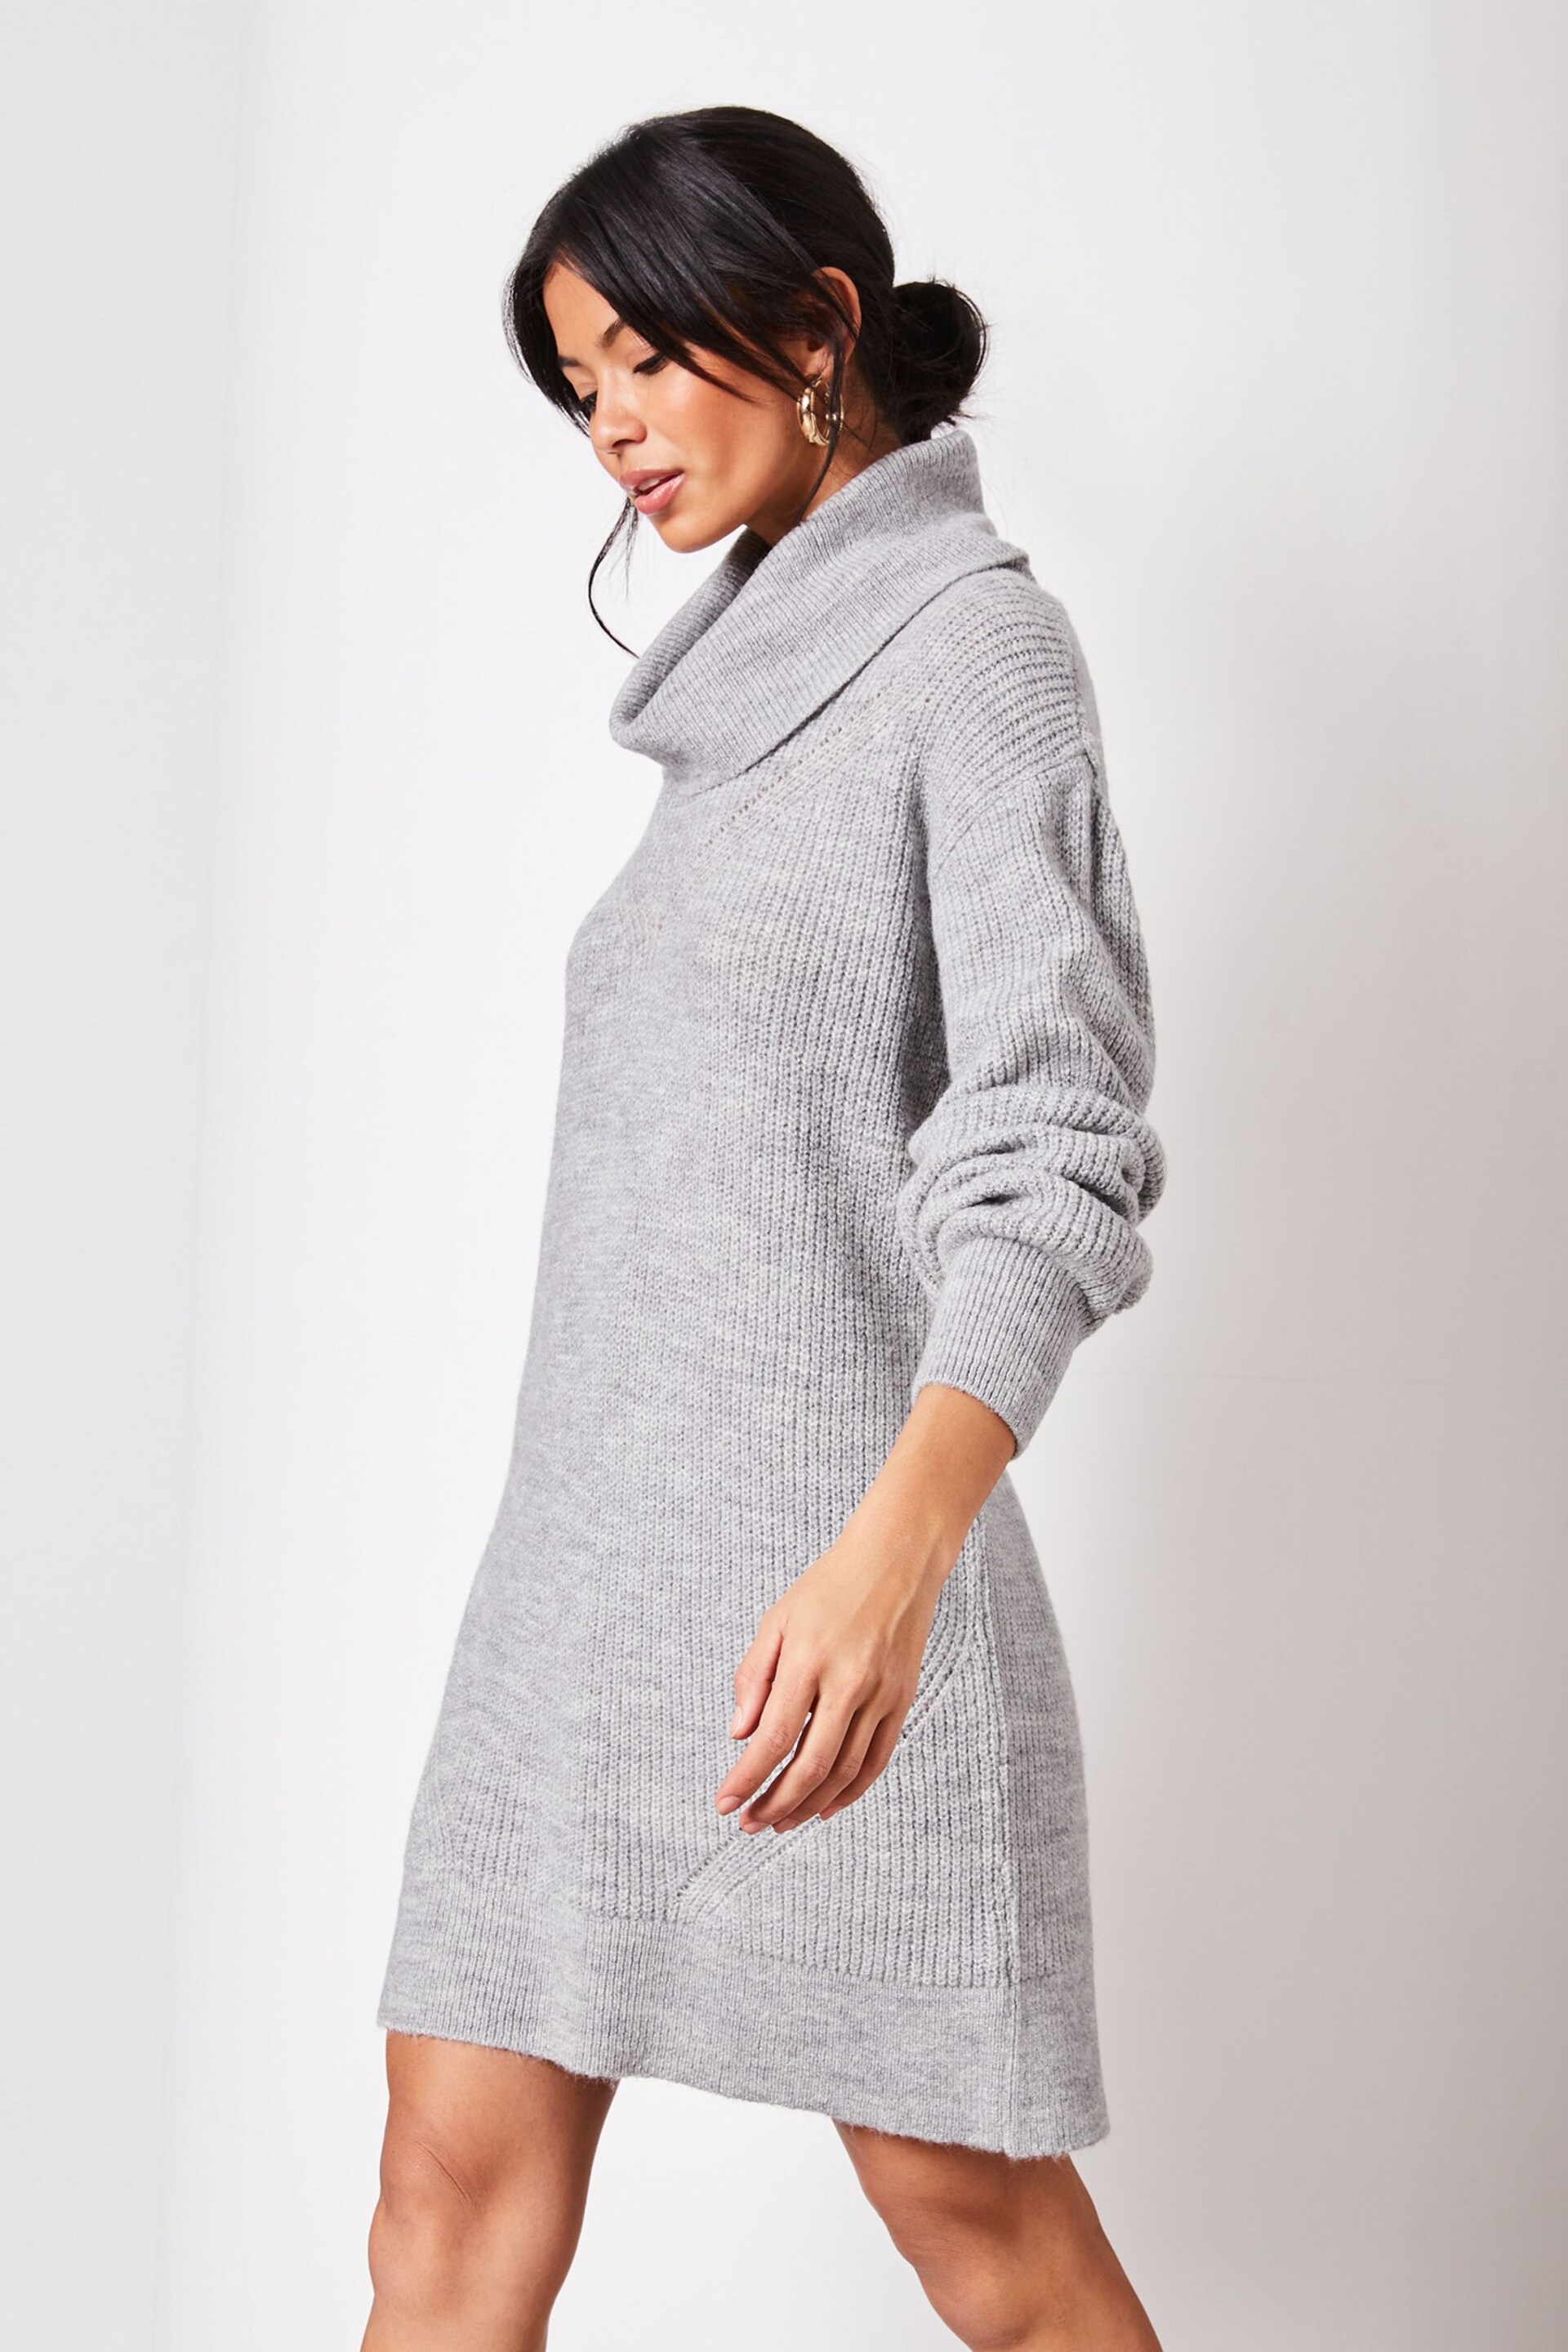 Lipsy Grey Long Sleeve Cowl Neck Knitted Jumper Dress - Image 1 of 4